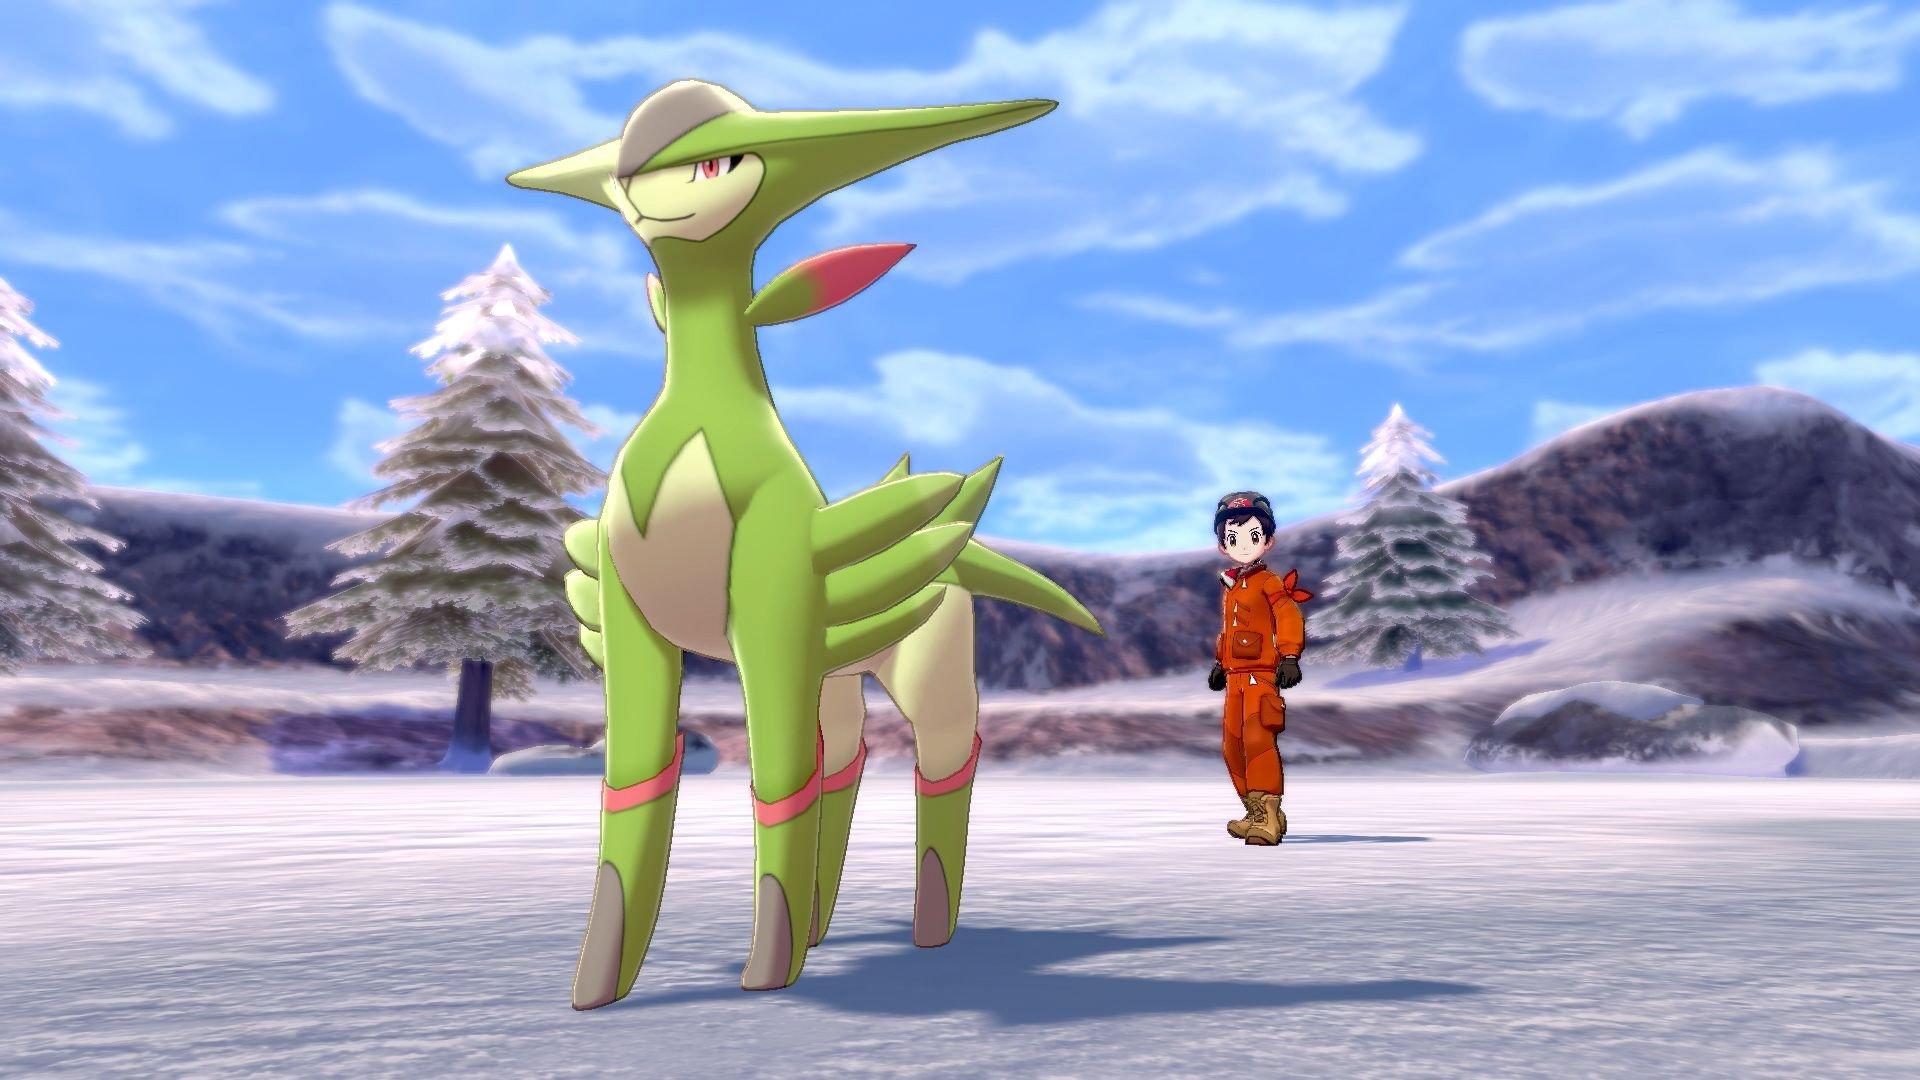 There's Snow Right Now In Pokémon Sword & Shield For An Event